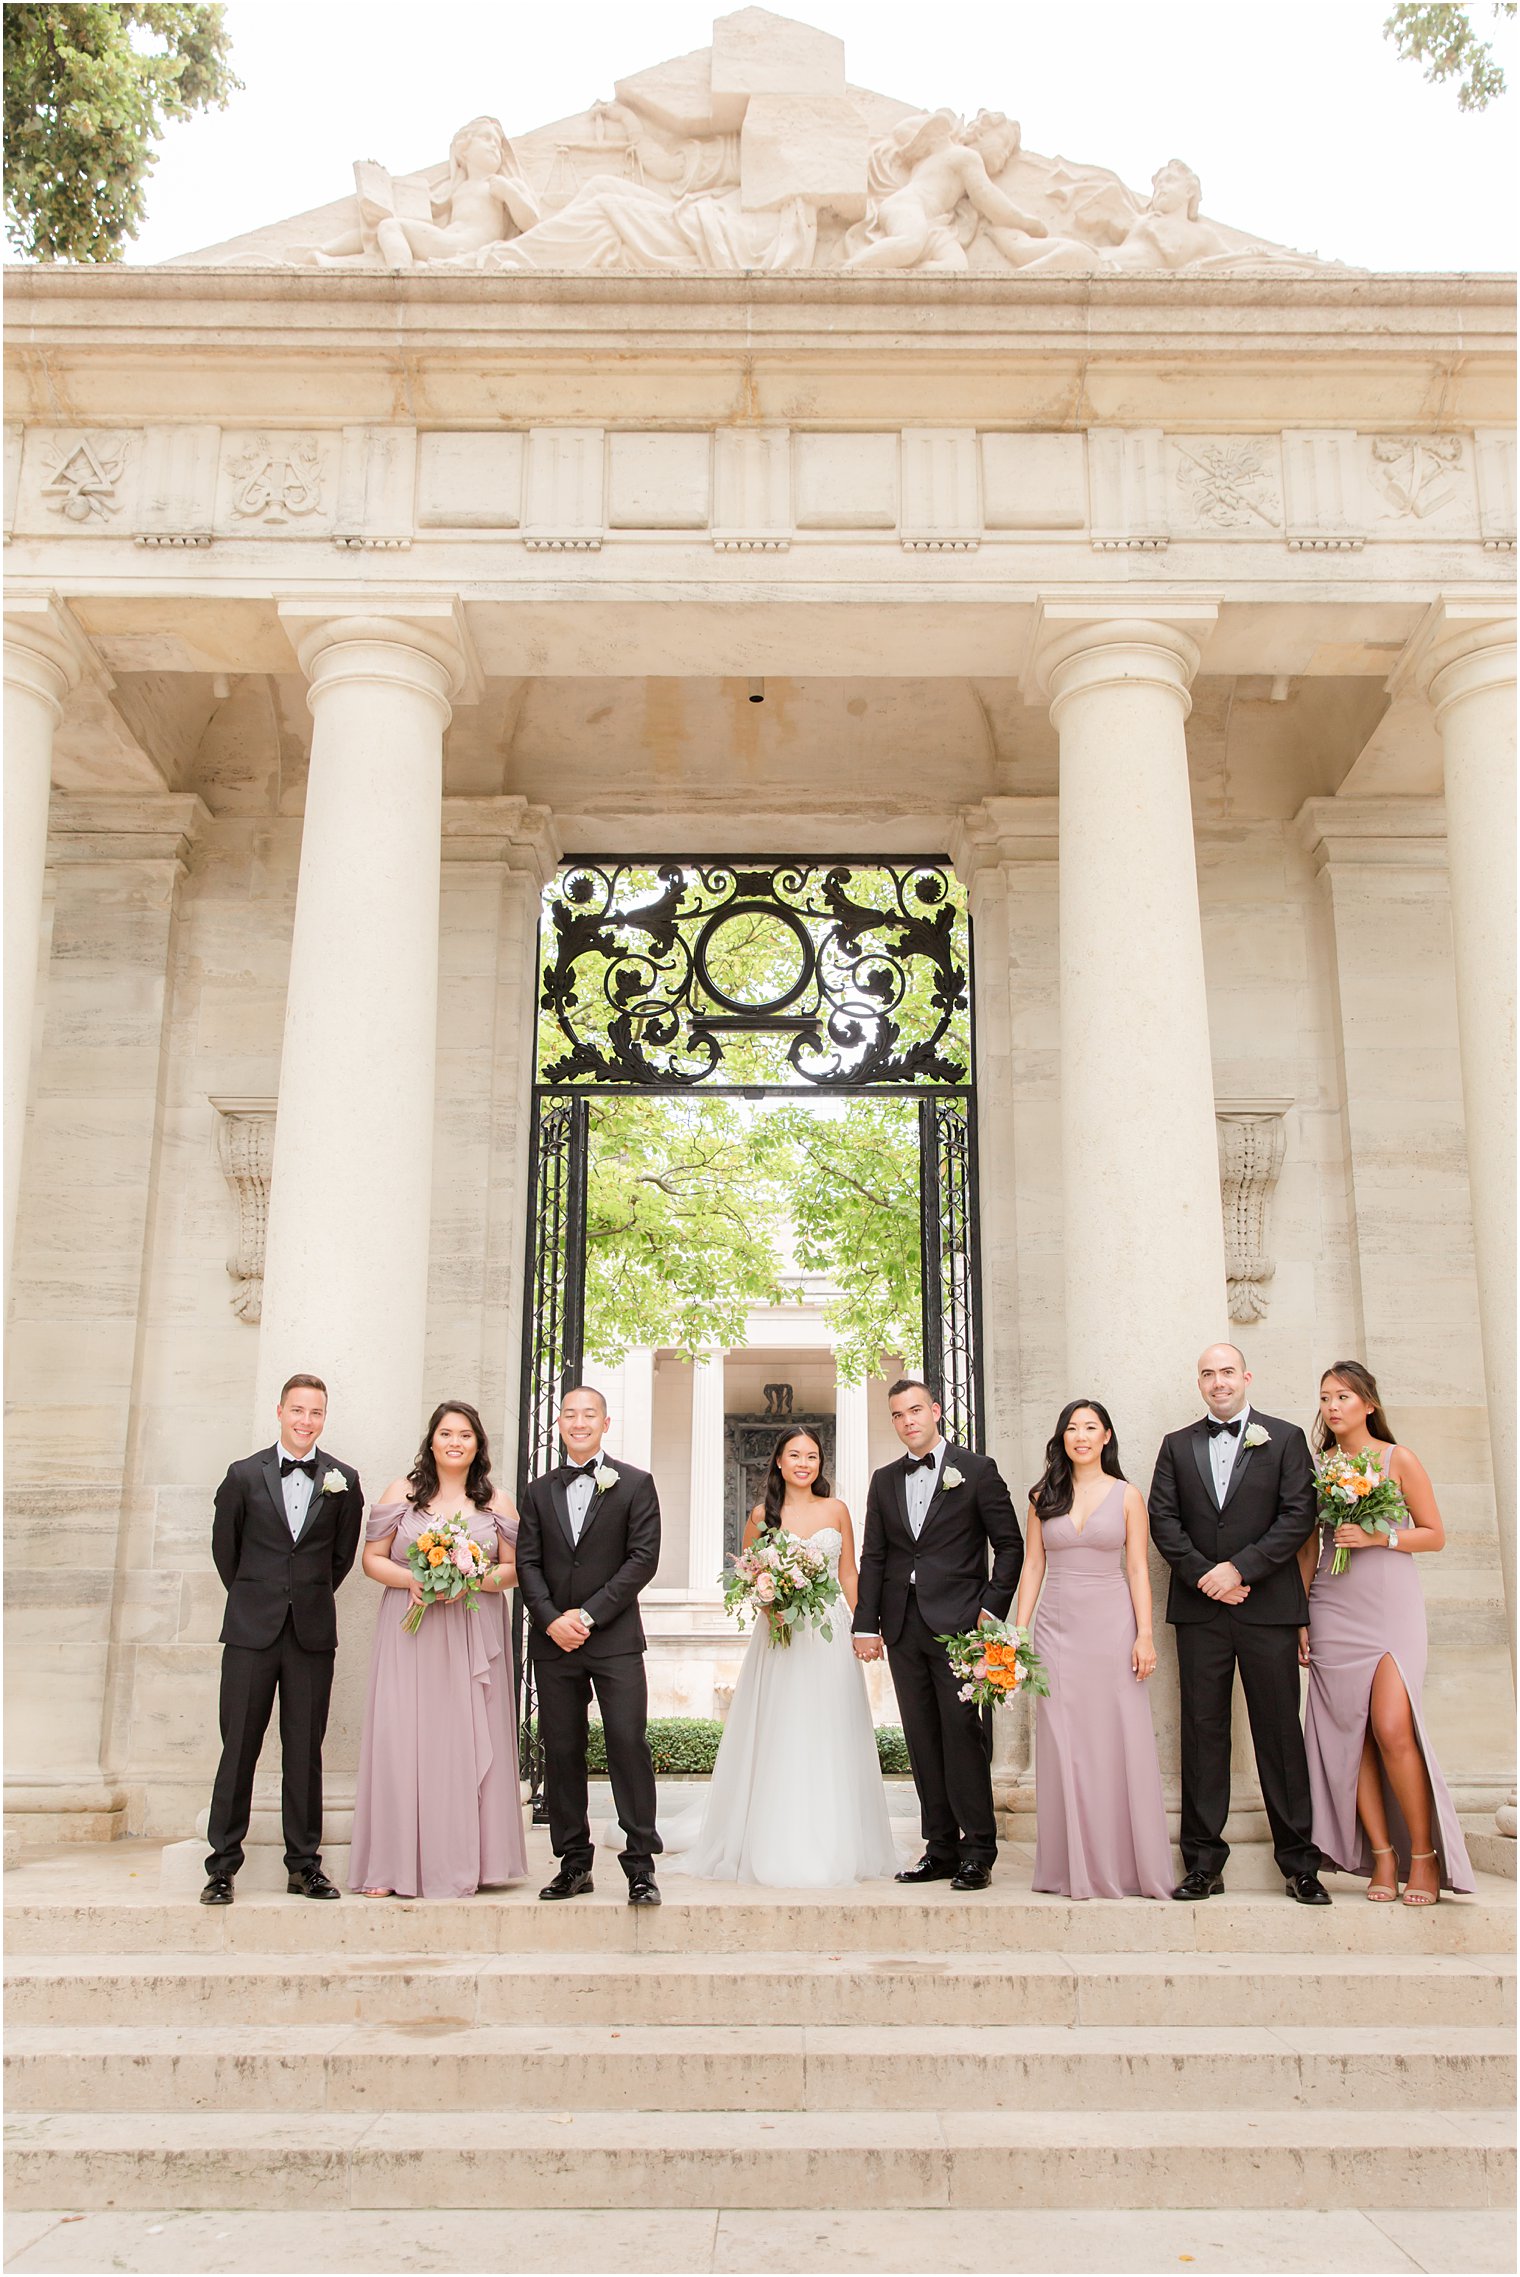 newlyweds stand with wedding party in black tuxes and mauve gowns on steps of the Rodin Museum in front of columns 